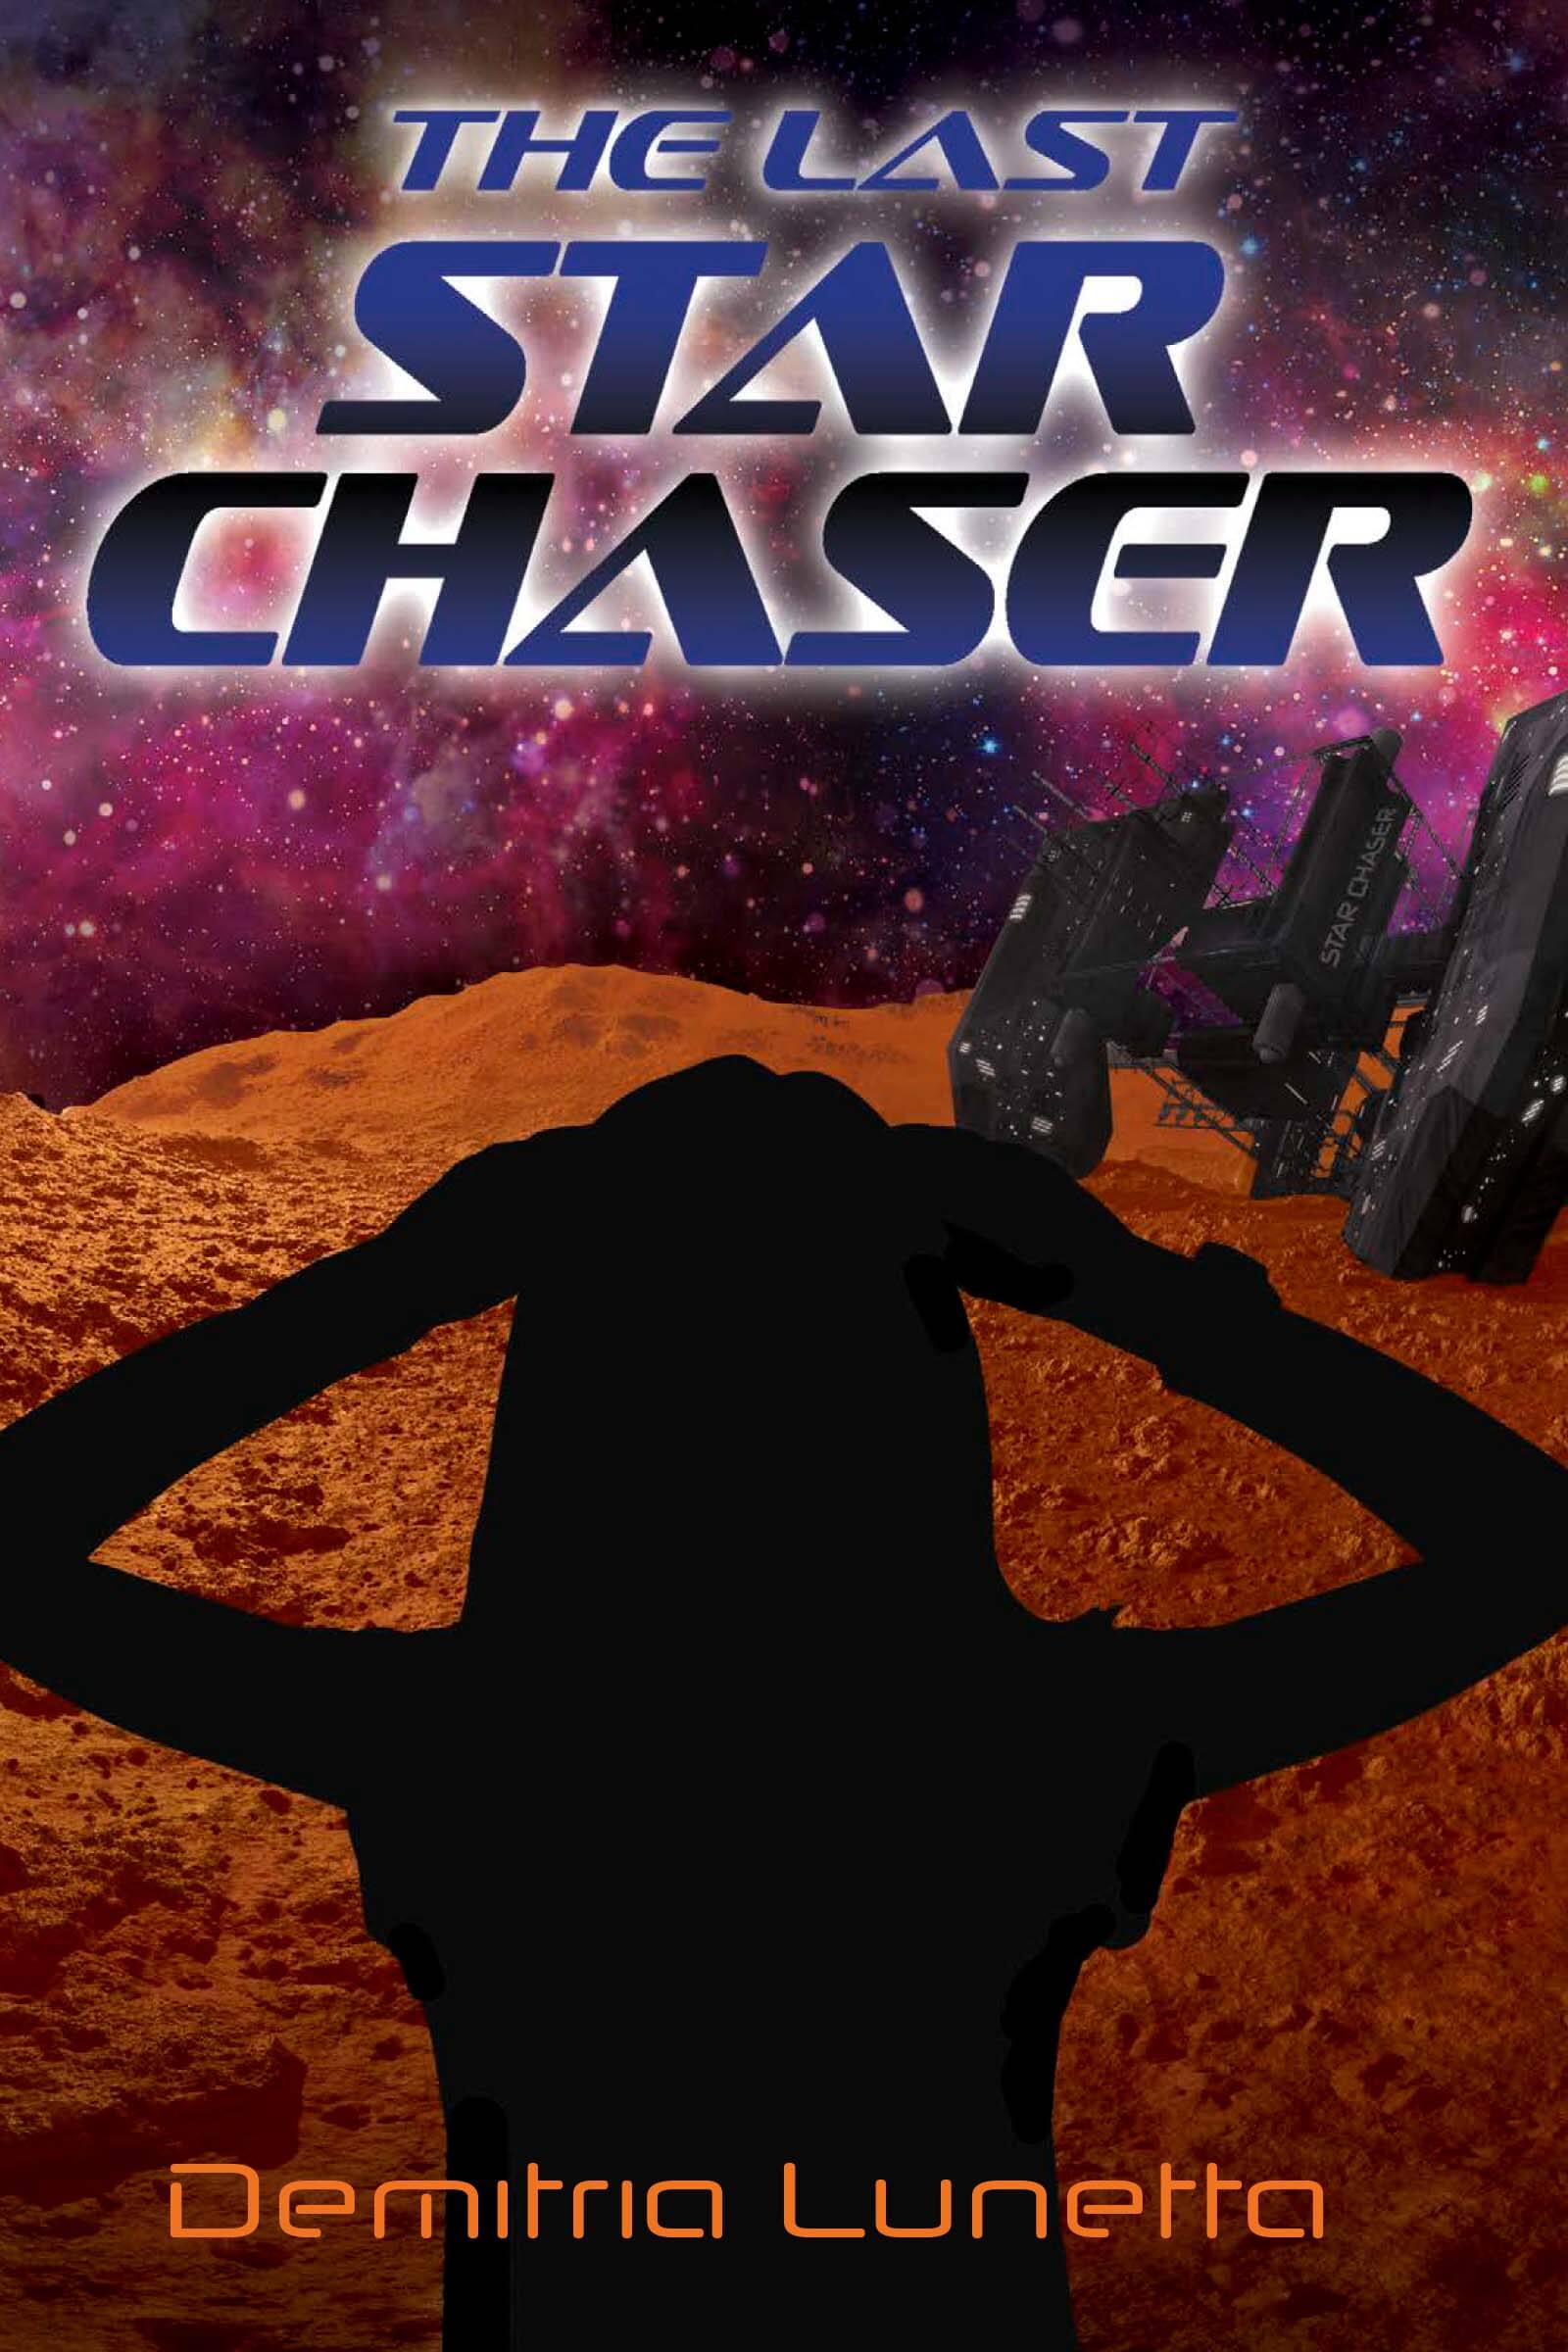 The Last Star Chaser